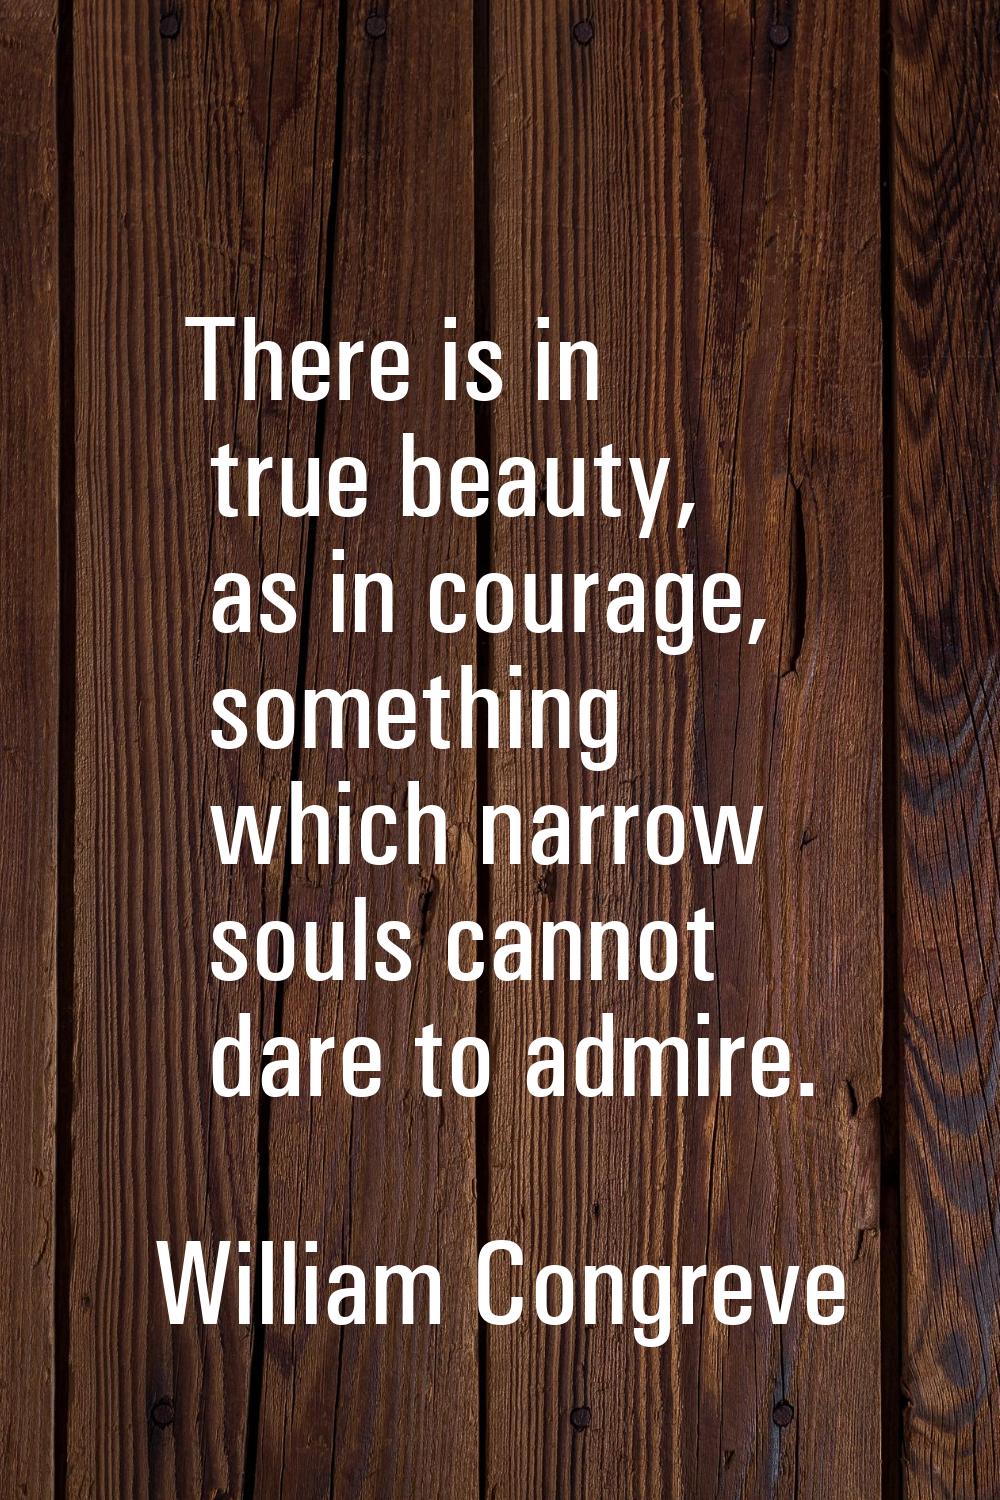 There is in true beauty, as in courage, something which narrow souls cannot dare to admire.